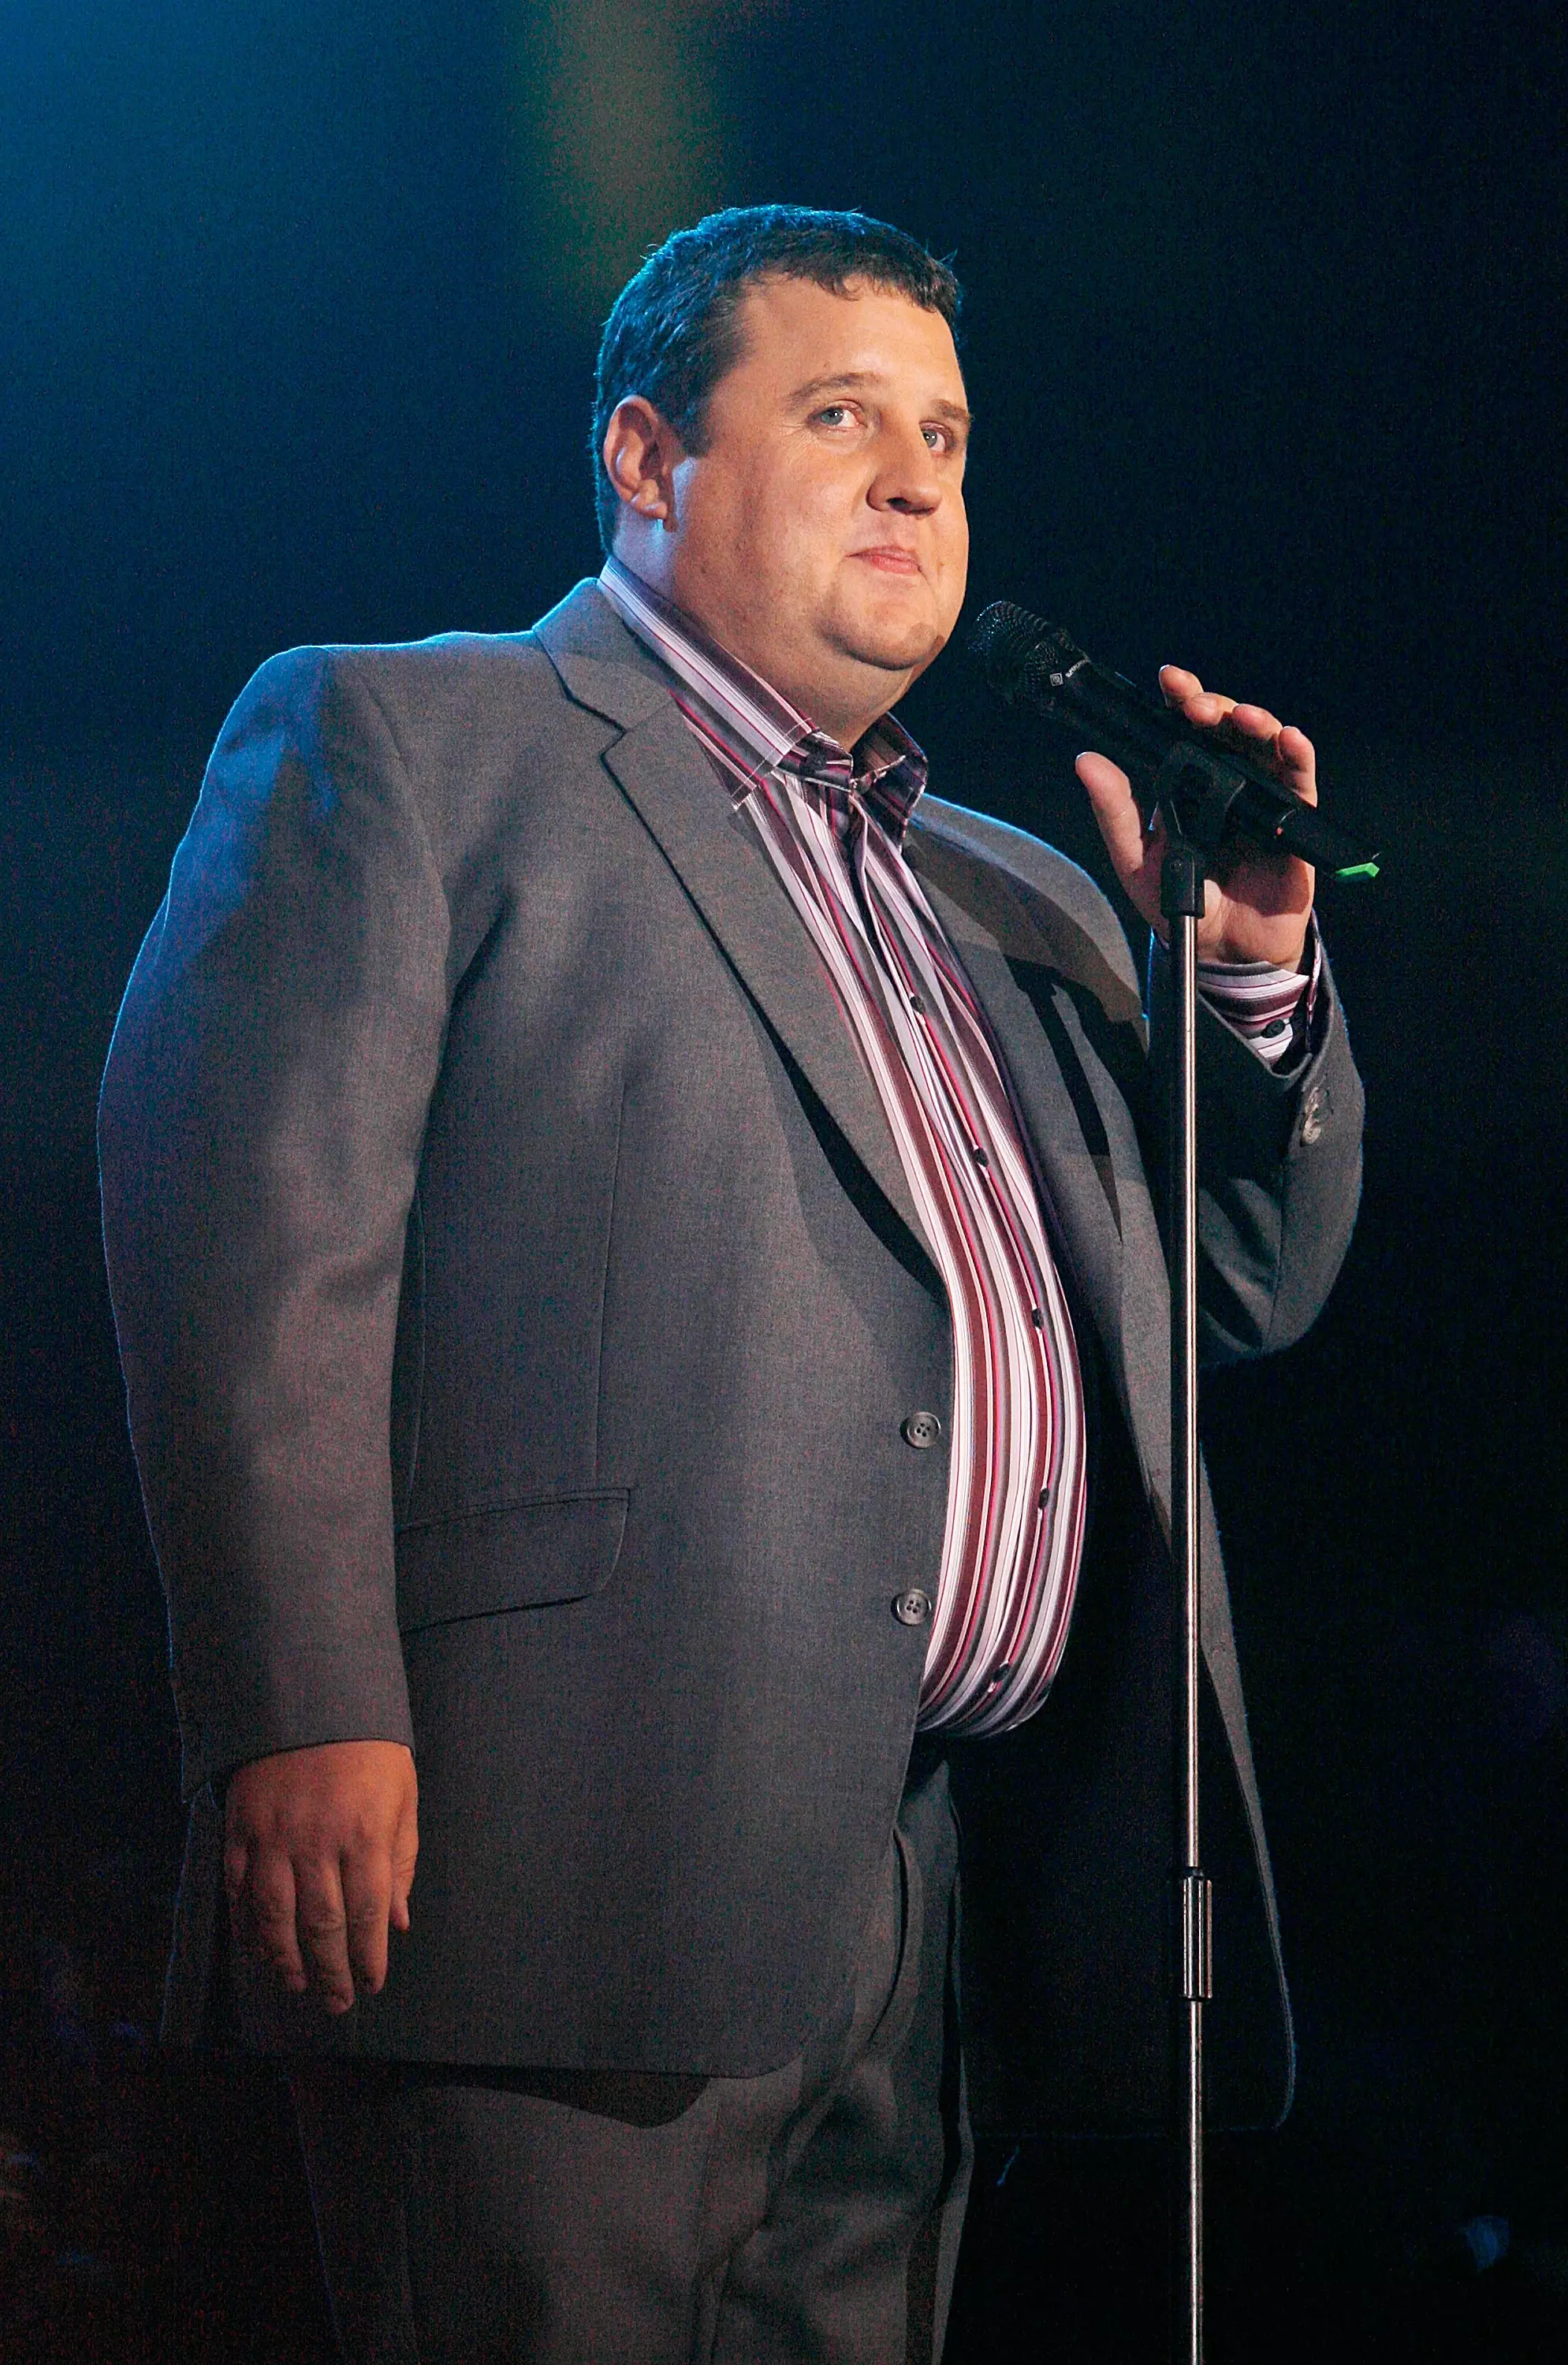 You can buy tickets for Peter Kay's Dance for Life tour now.